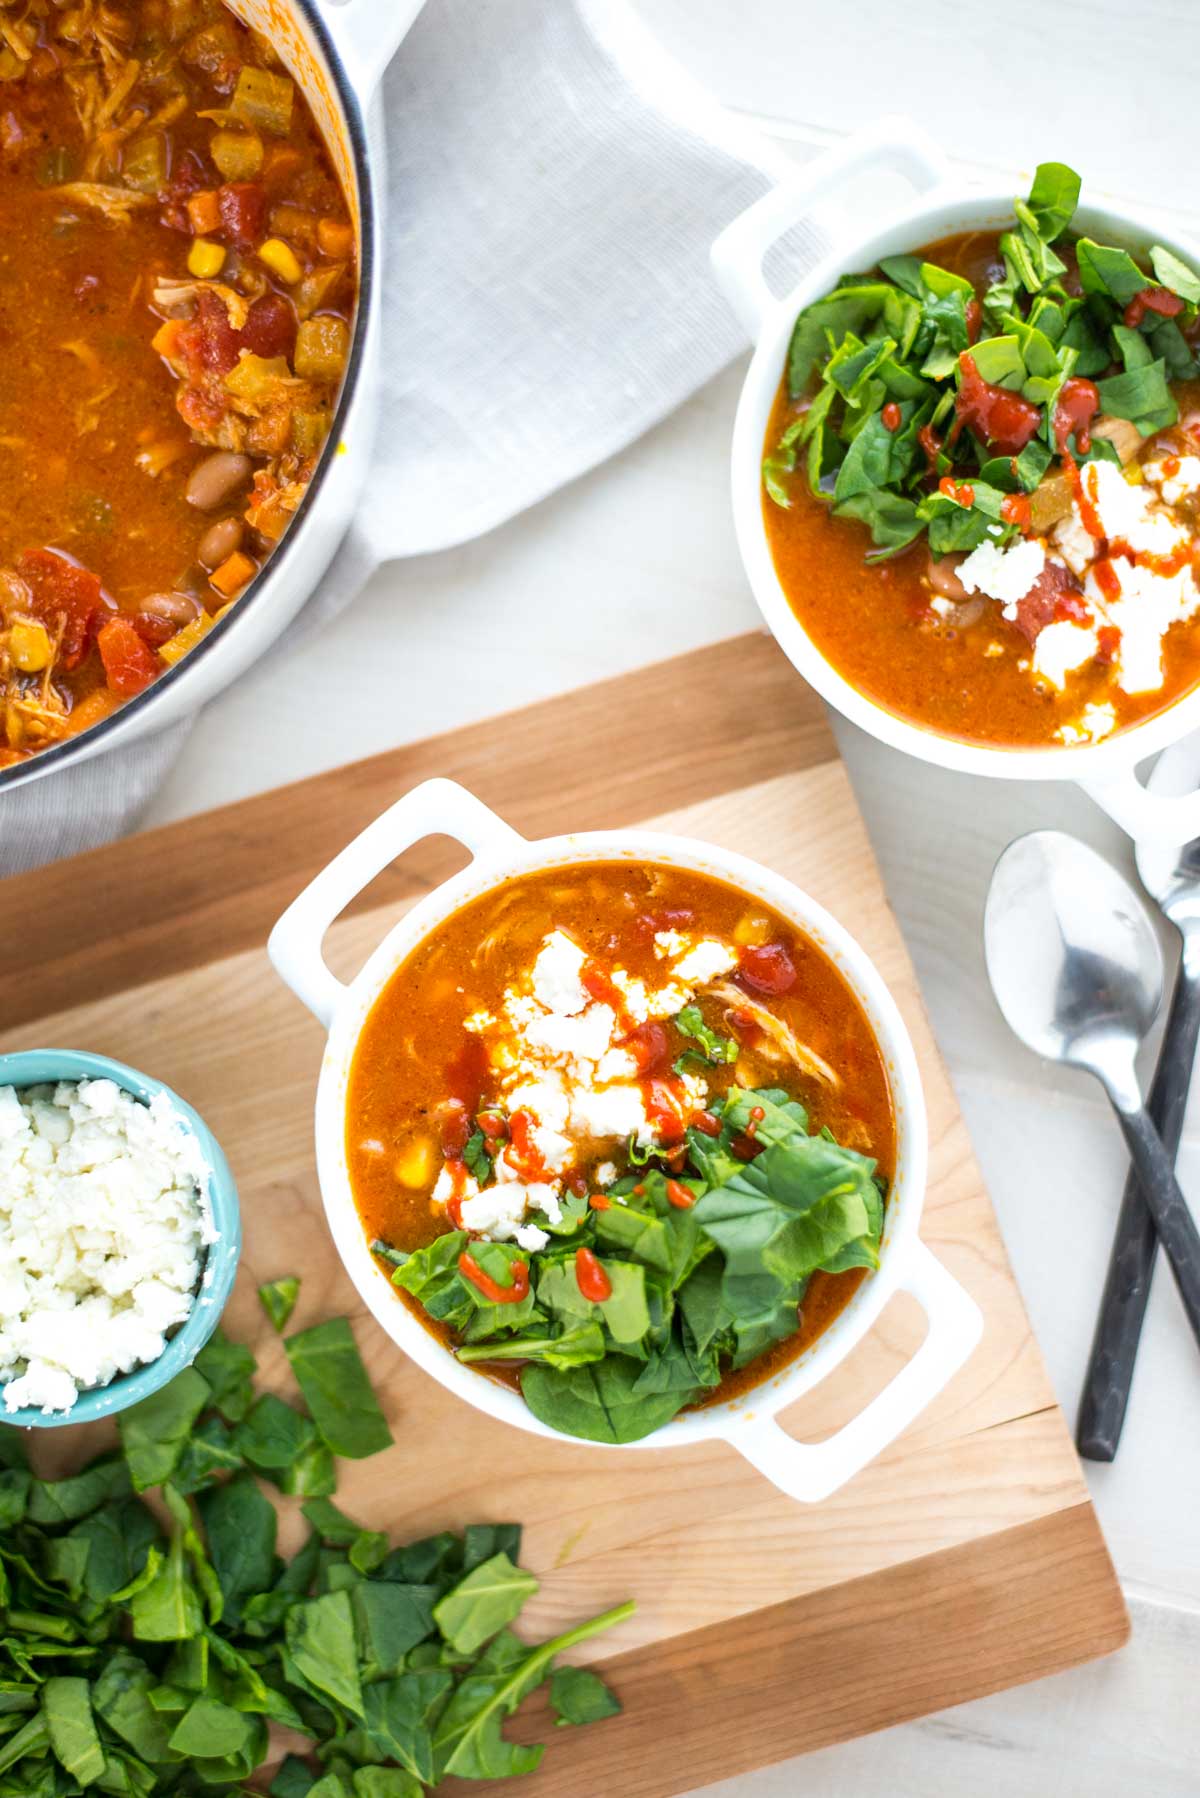 Looking for a twist to traditional chili? Want something loaded with nutrition and flavor. Check out this HEALTHY slow cooker buffalo chicken chili.